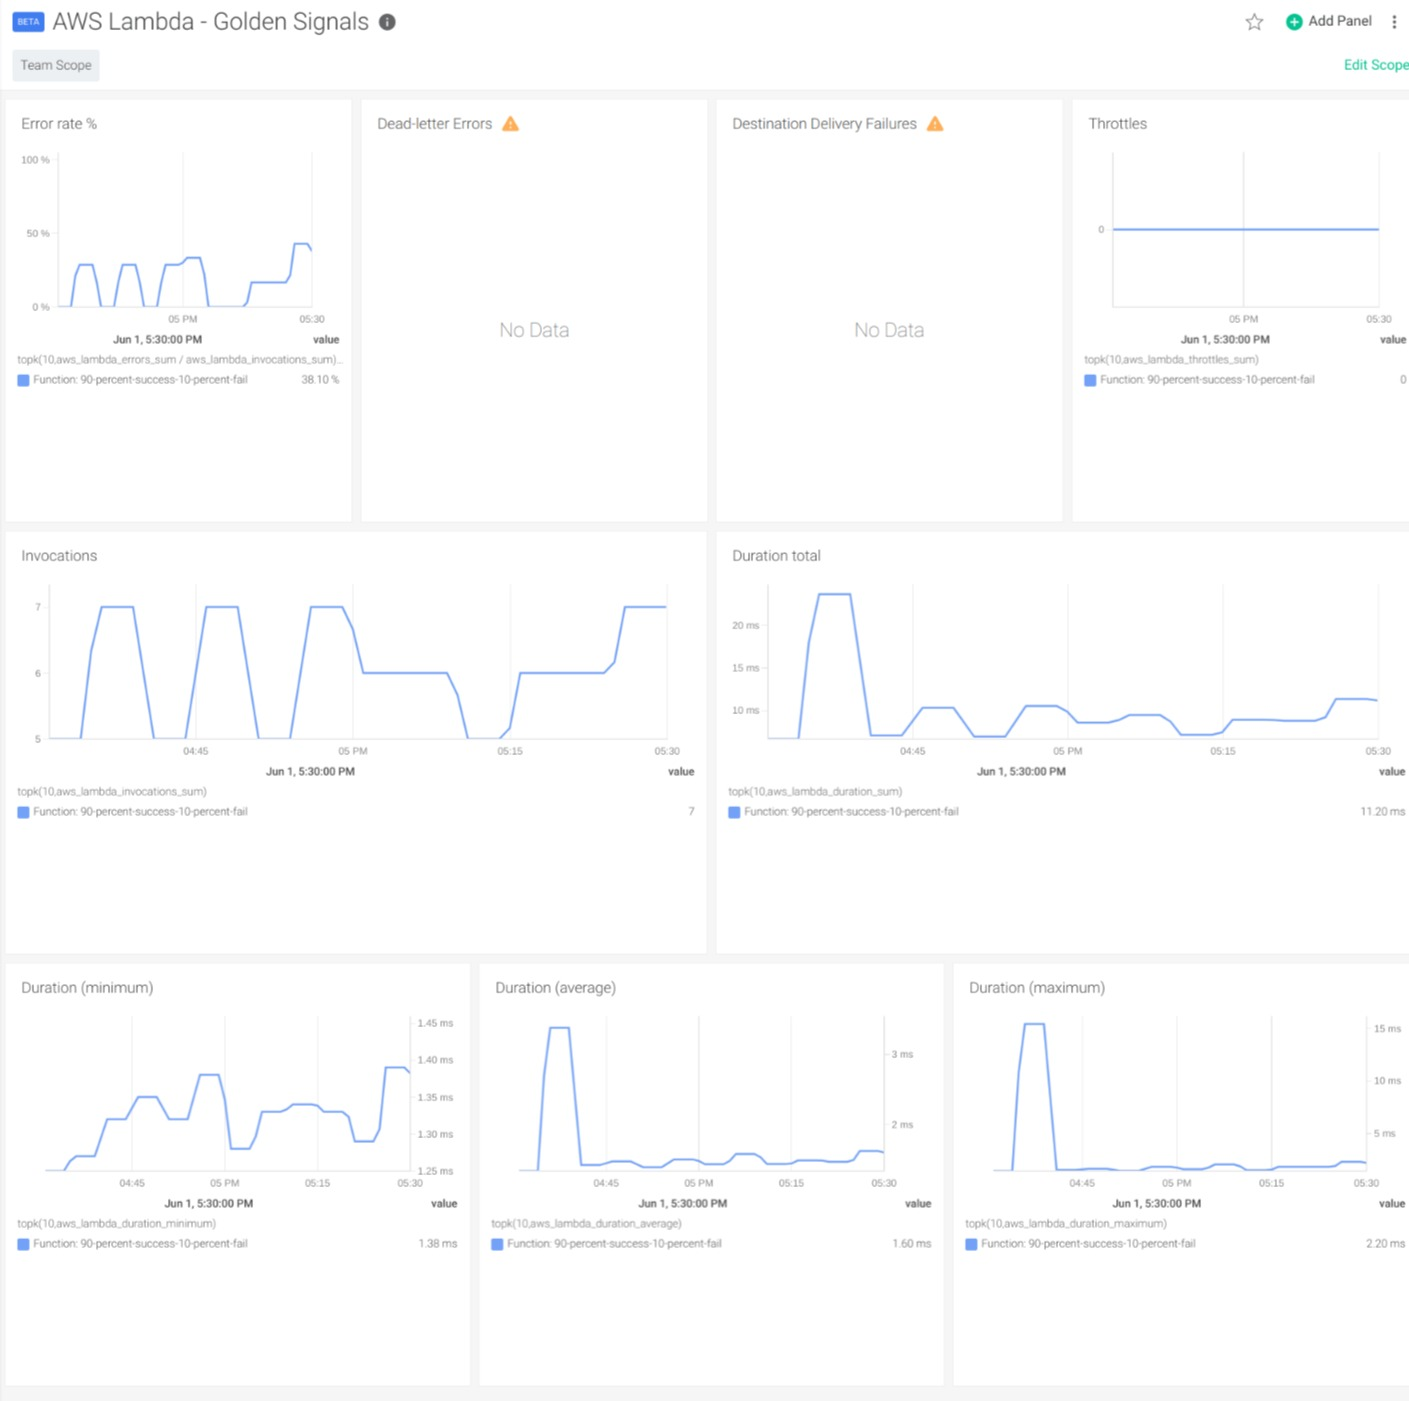 Dashboard to monitor AWS lambda golden signals, containing panels like "Error rate", "Throttles", "Invocations" or "Duration"